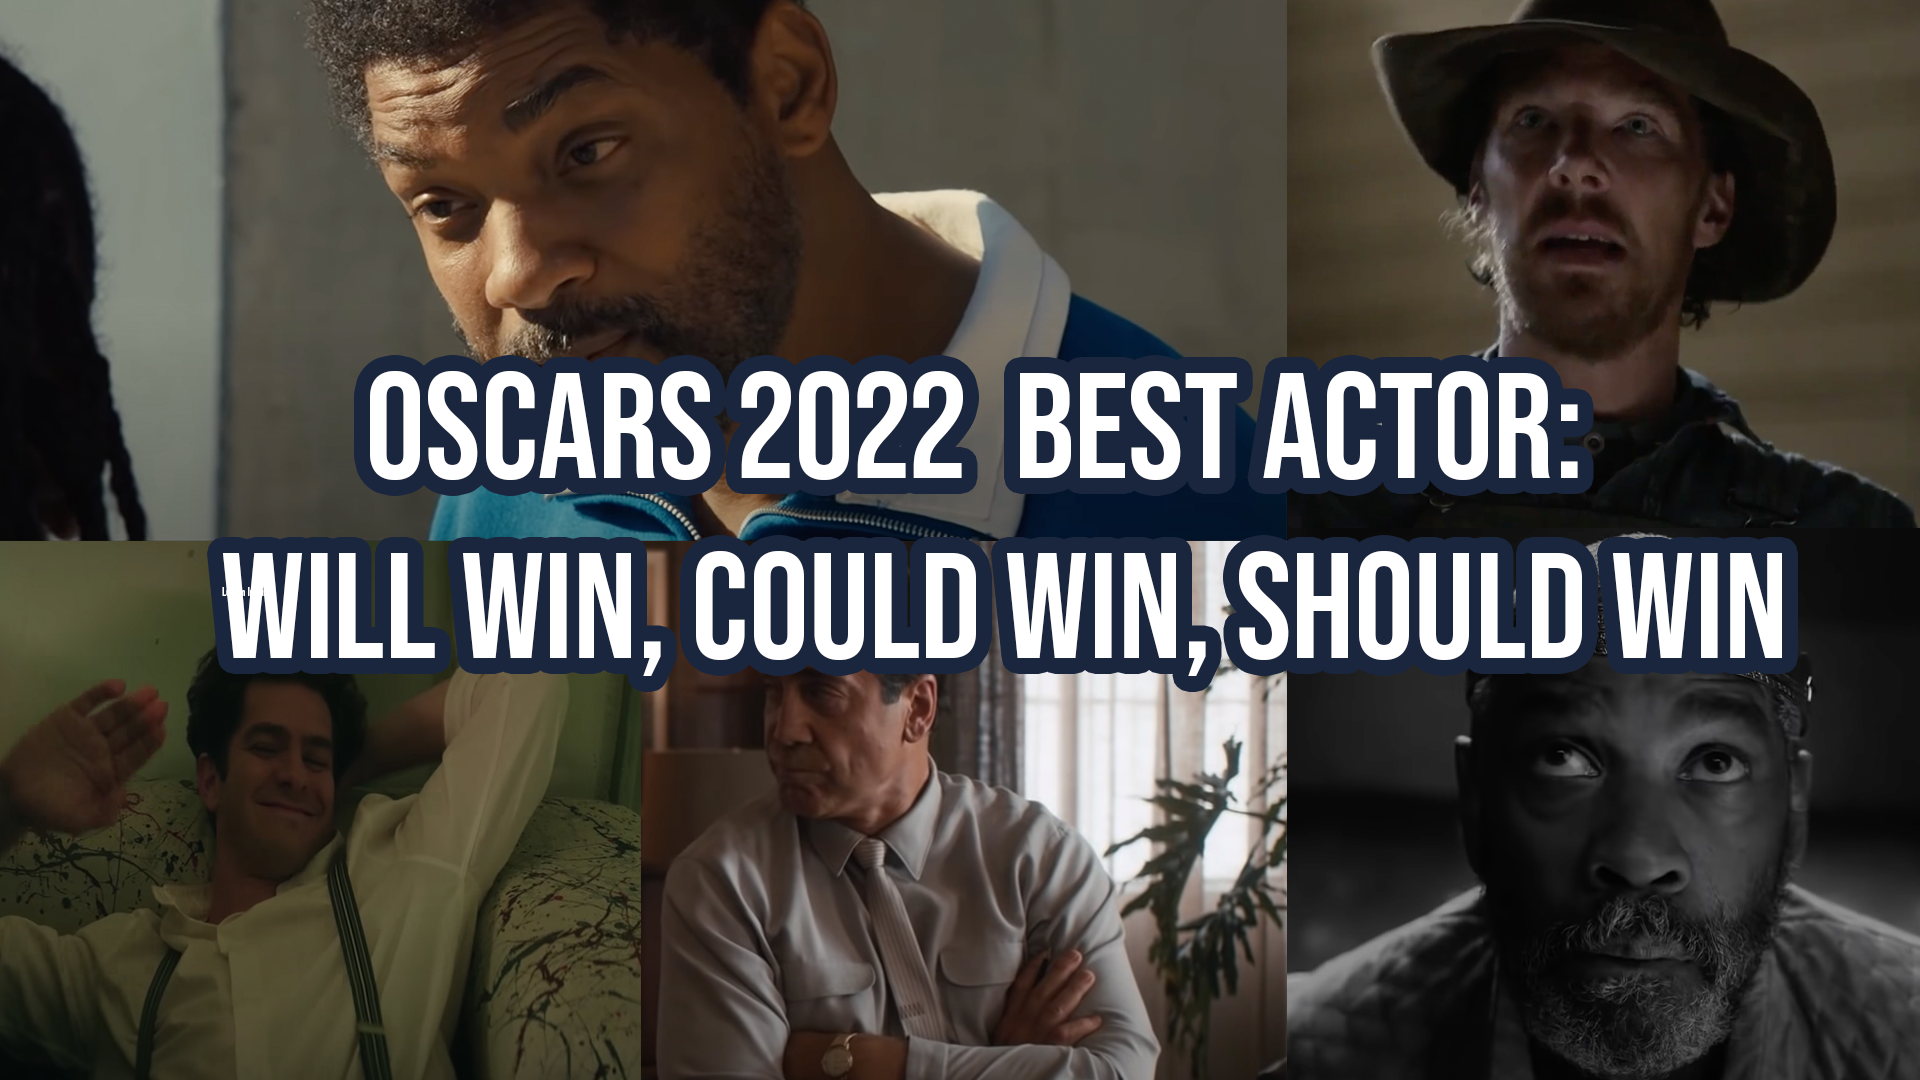 Oscars 2022 Best Actor: Will Win, Could Win, Should Win